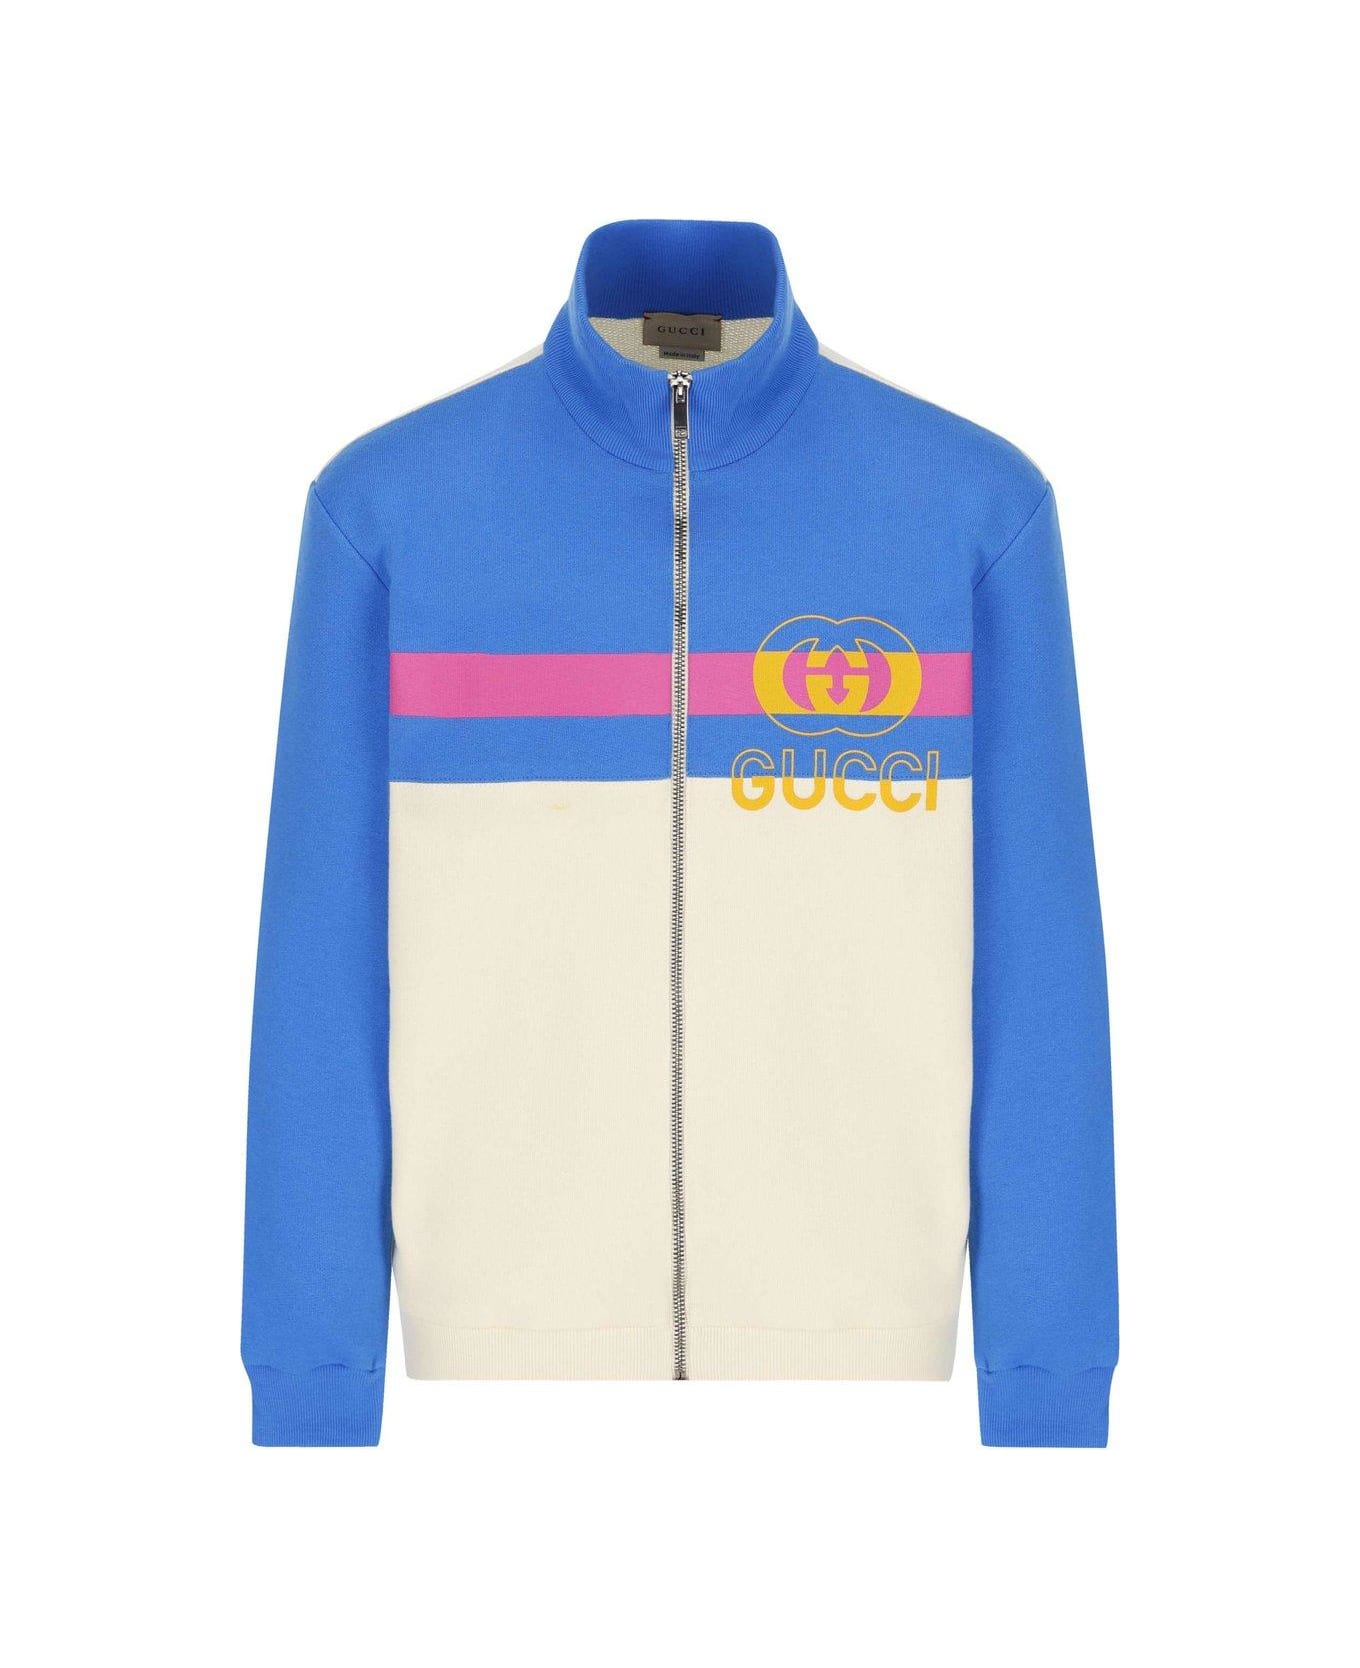 Gucci Zip-up High Neck Jacket - Sunkissed